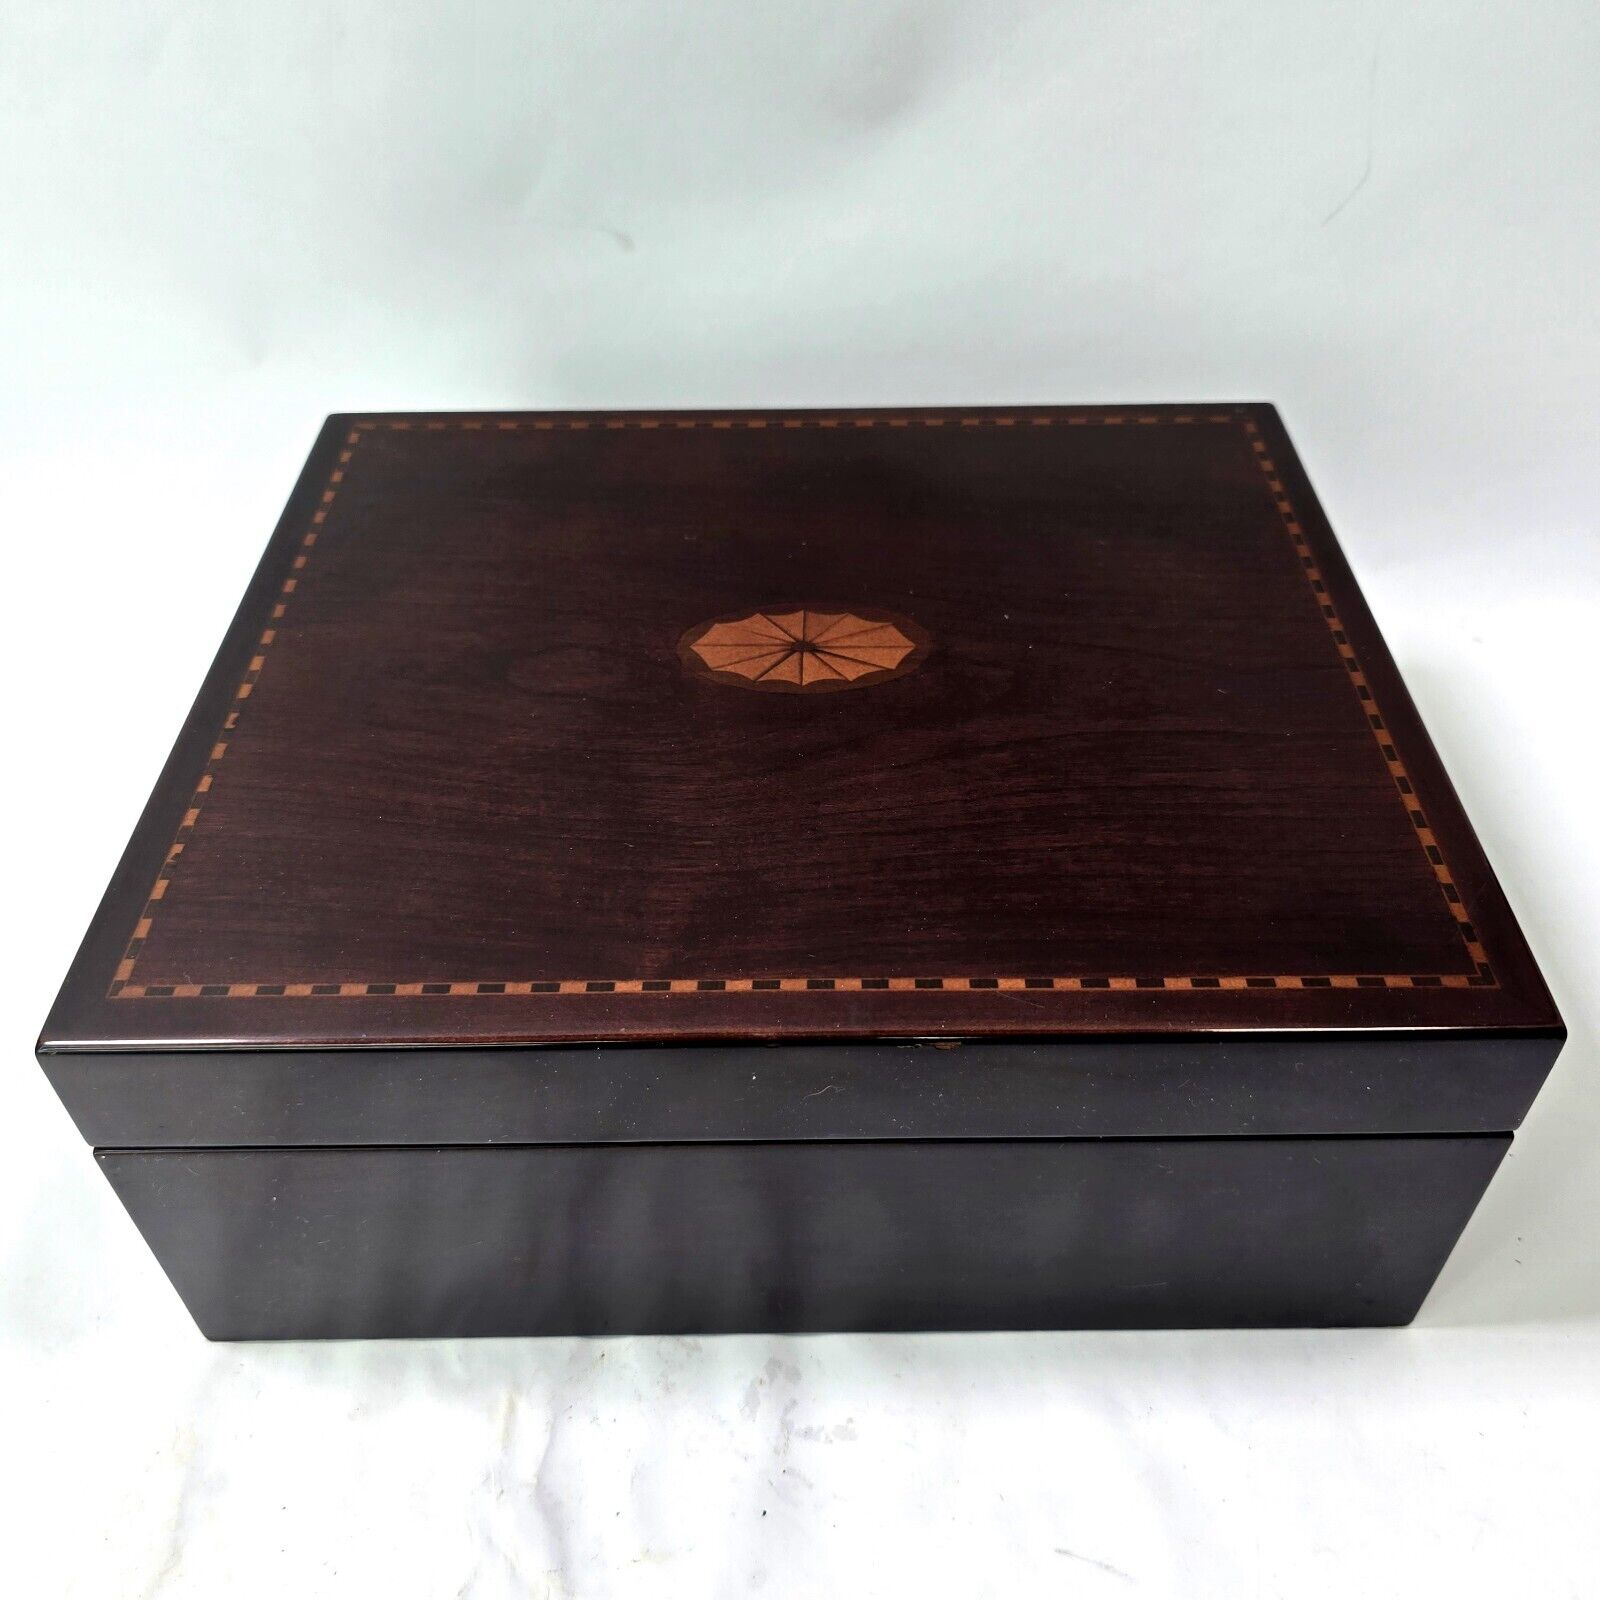  The Bombay Company Cigar Humidor with Hygrometer Cherry Color Mint Condition.